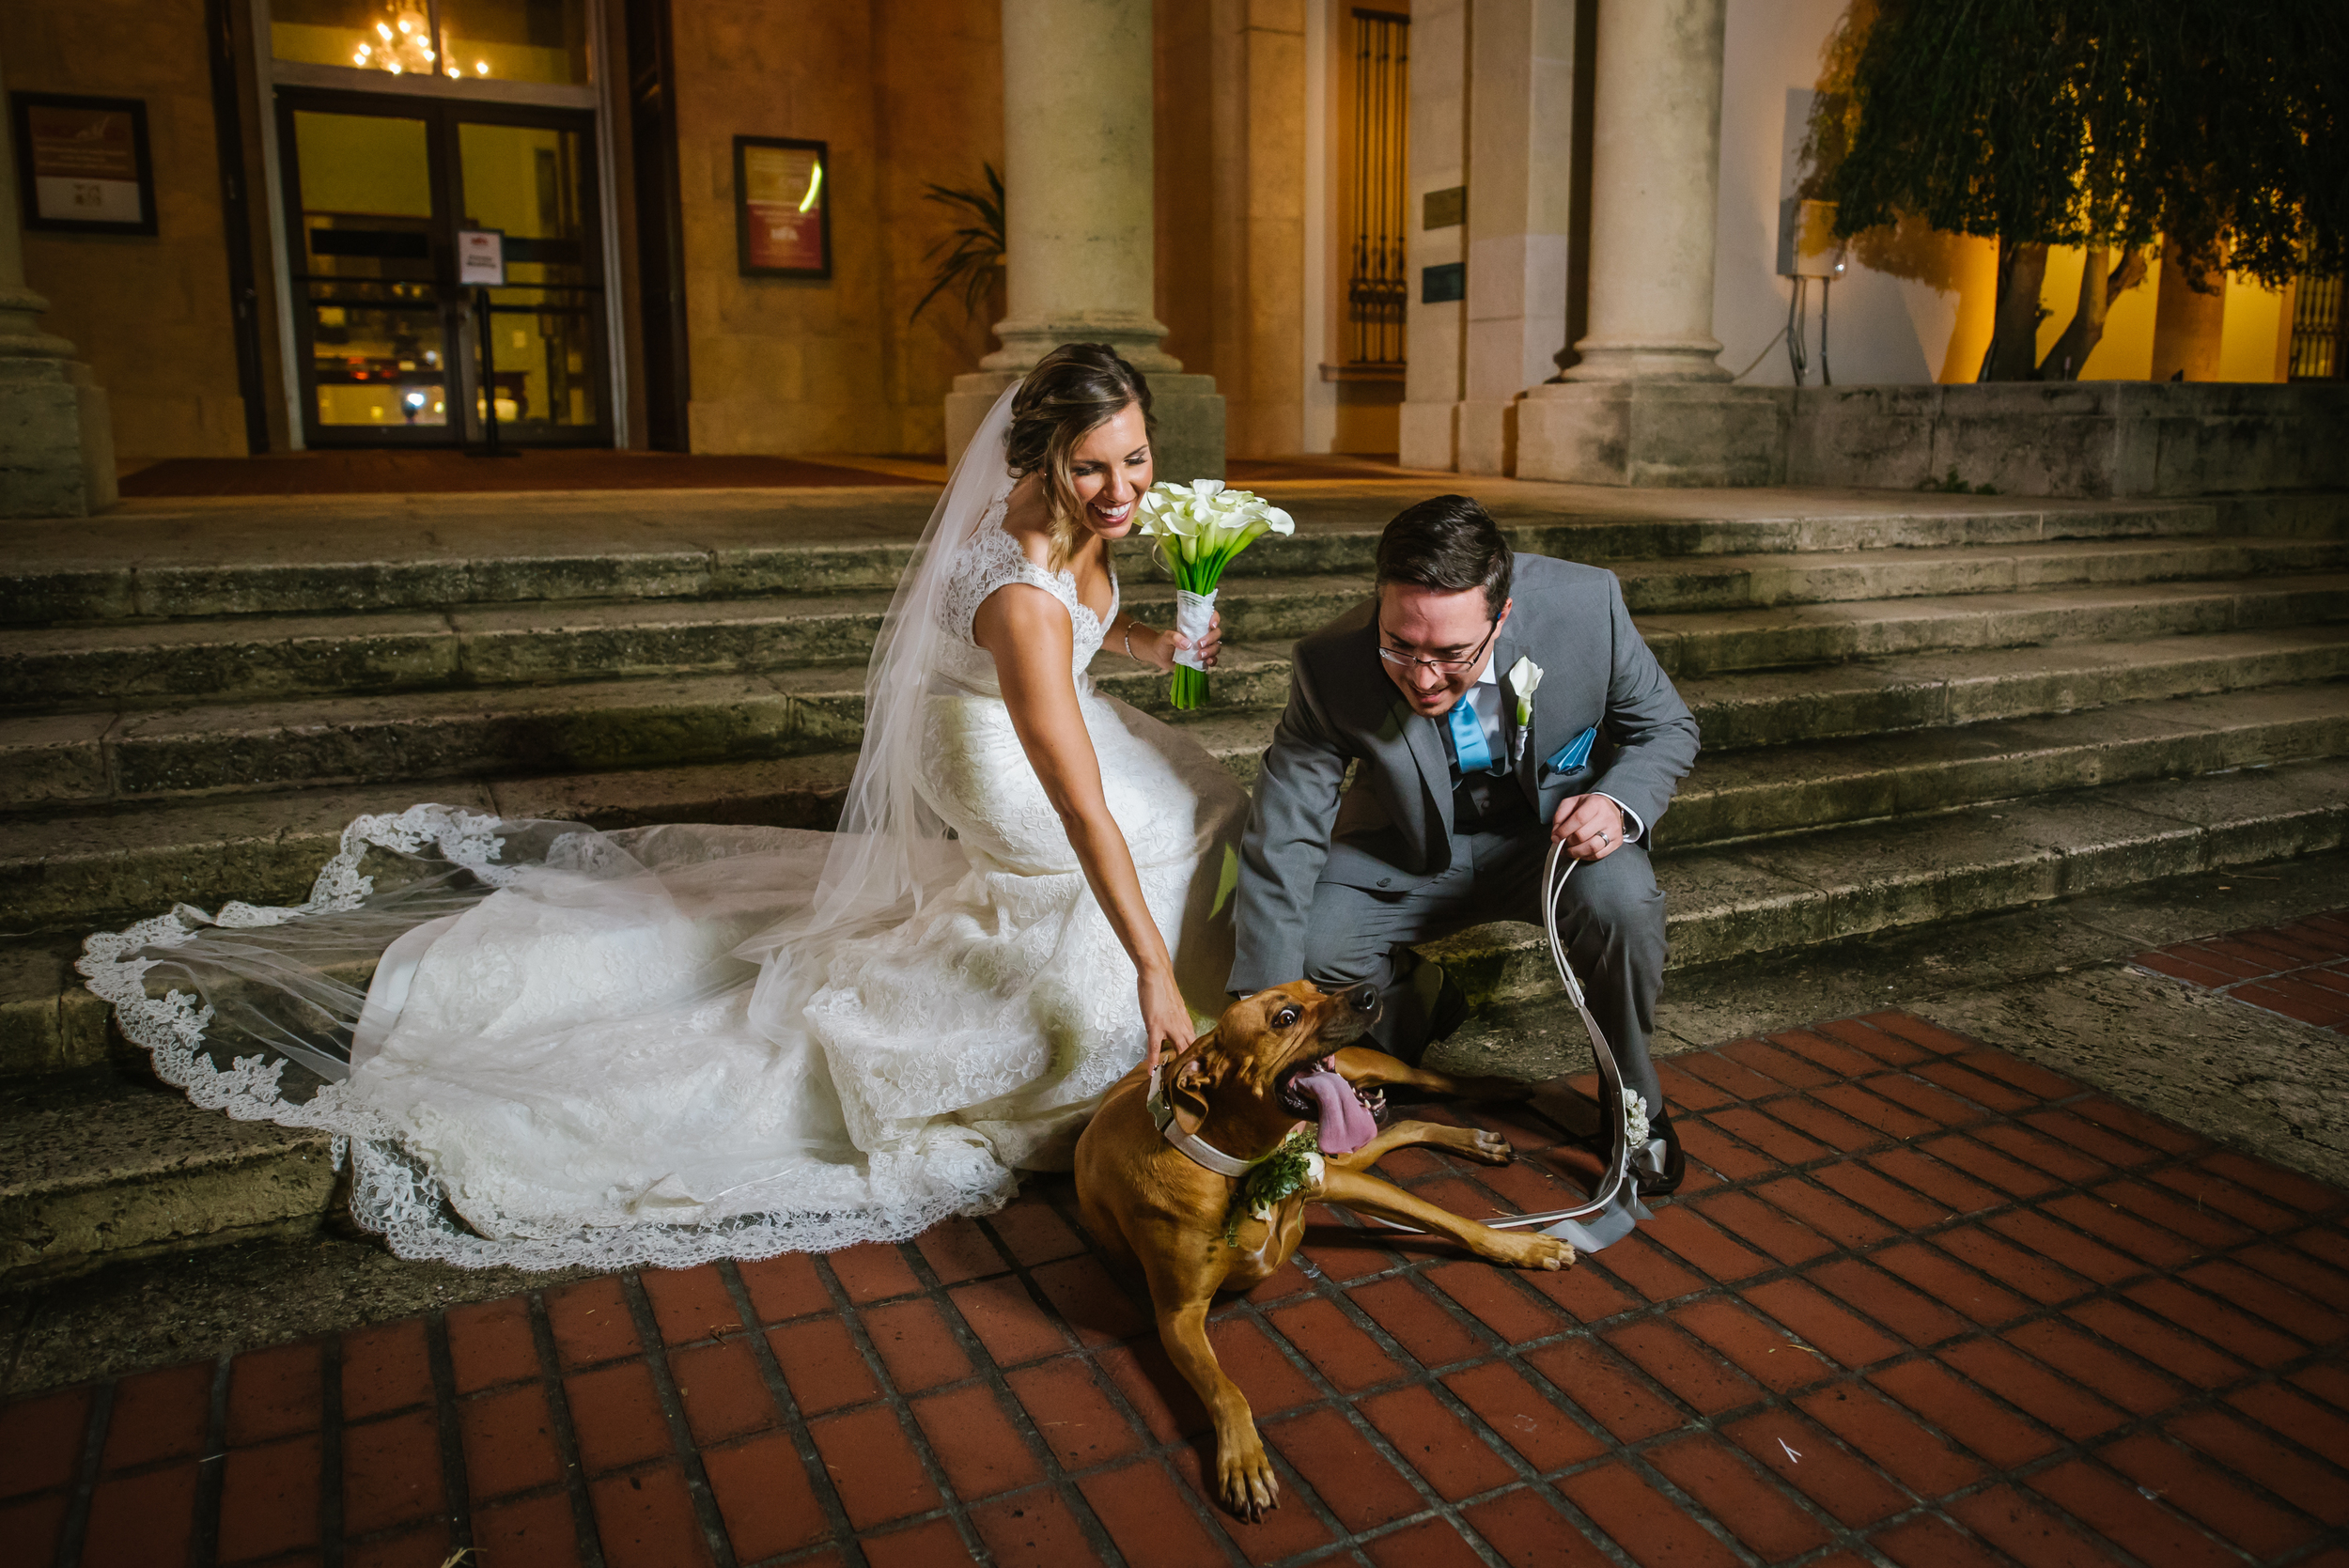 Mark and Jo had an amazing wedding day complete with their fur baby Phoebe! Her face, yep, sums it up.&nbsp;